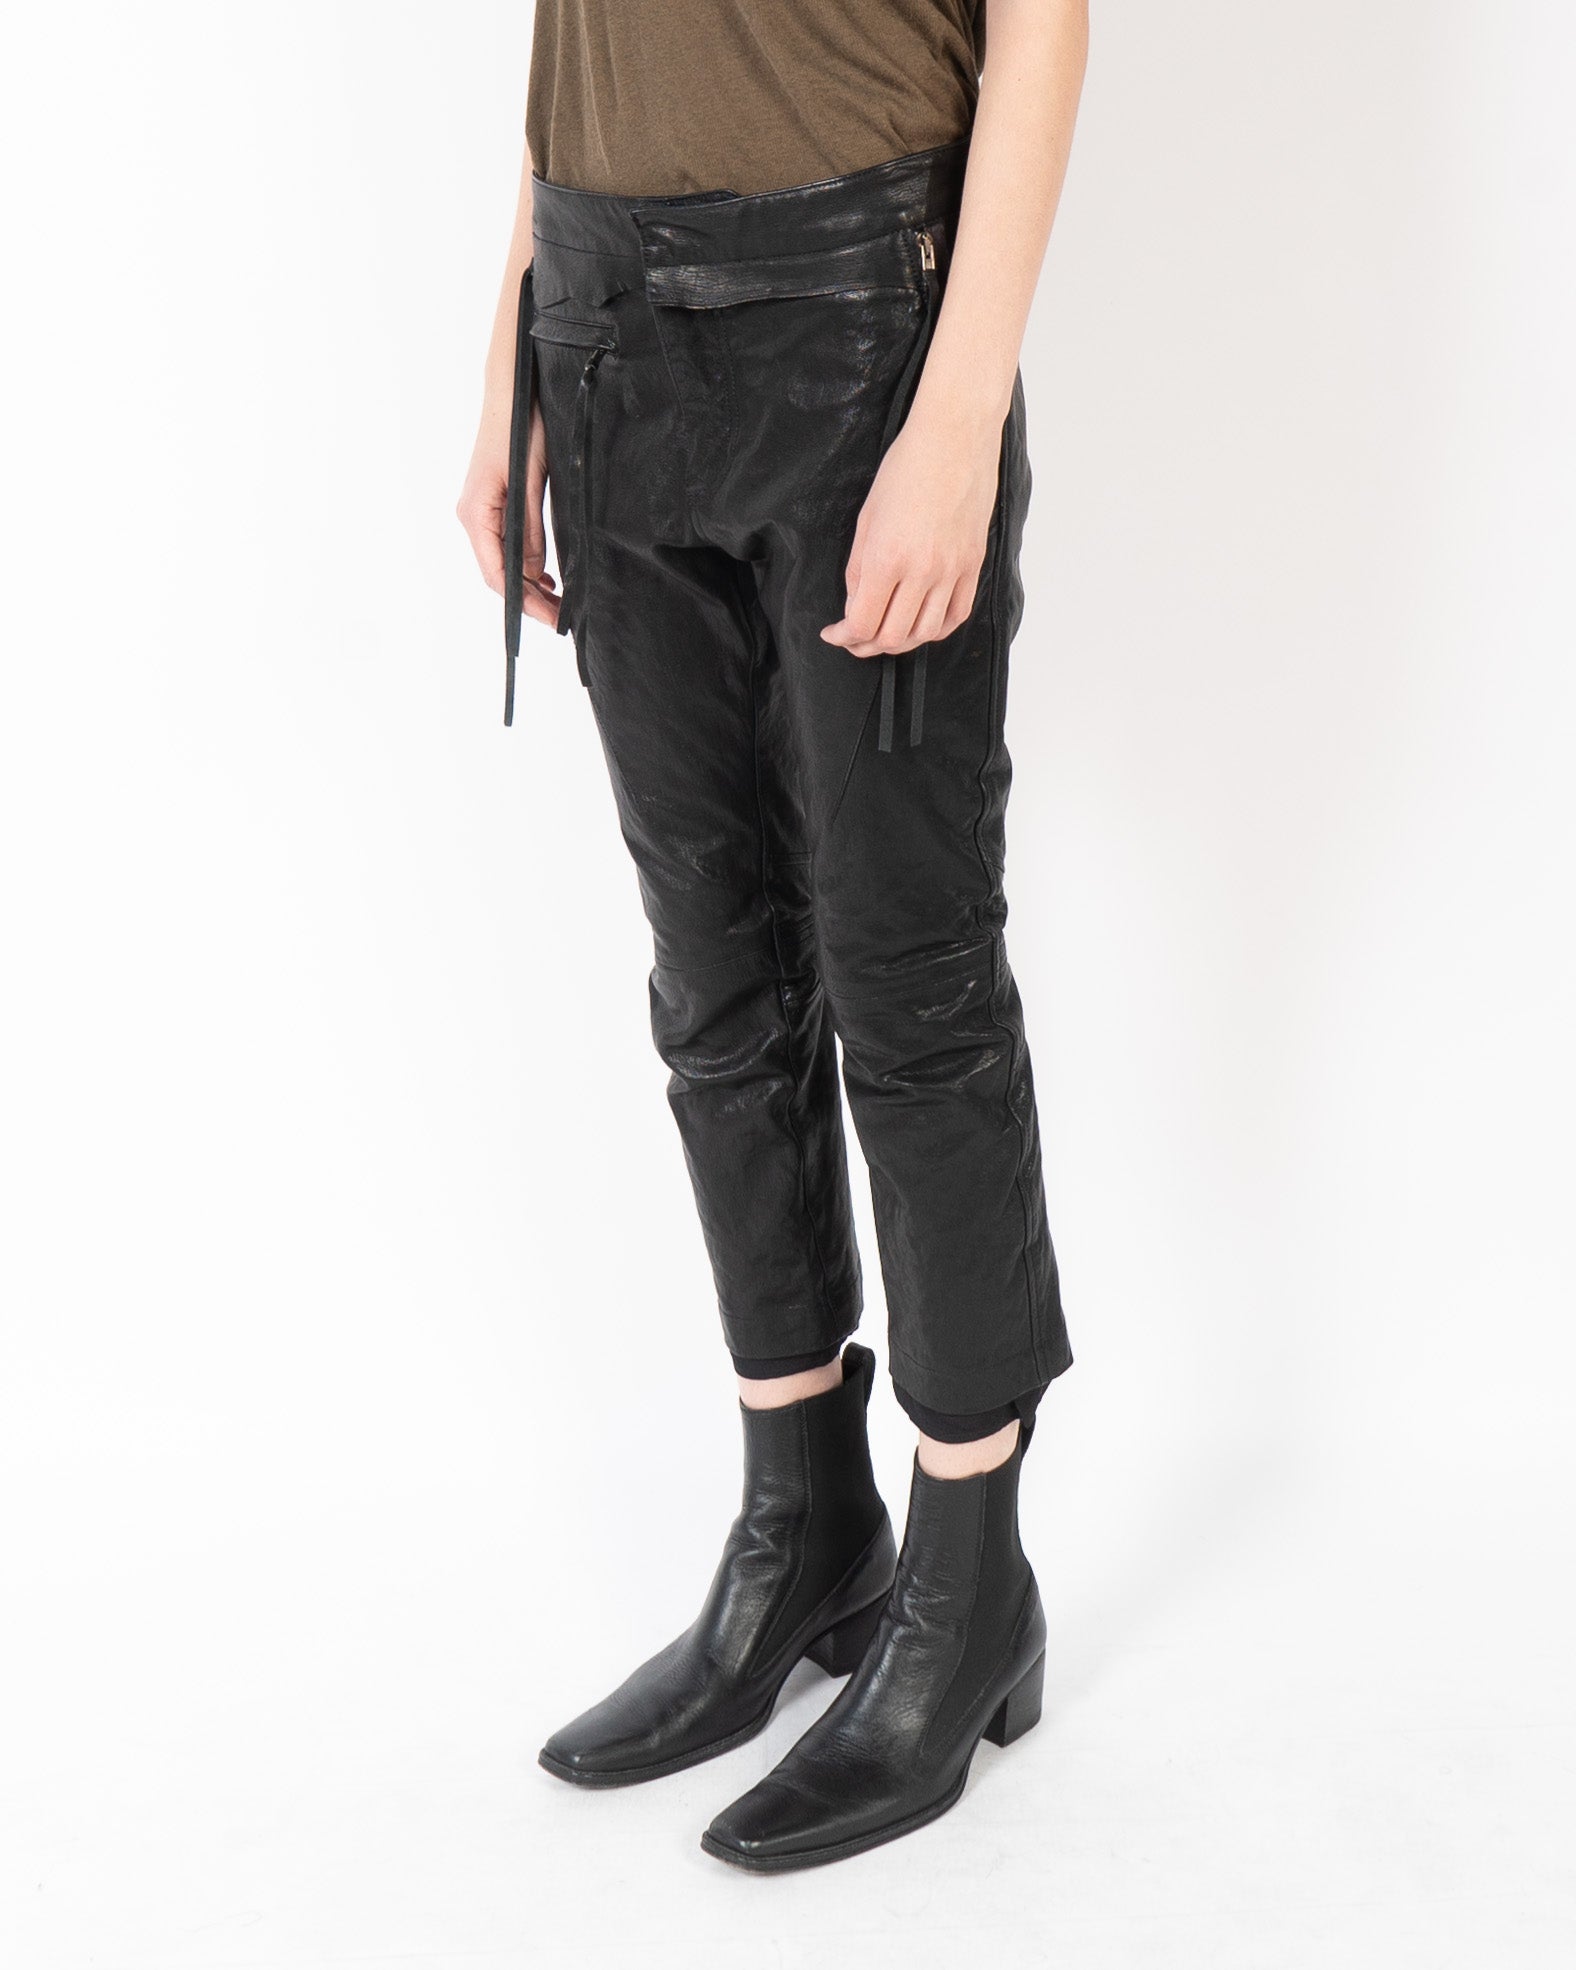 SS16 Distressed Waist Trousers in Black Leather